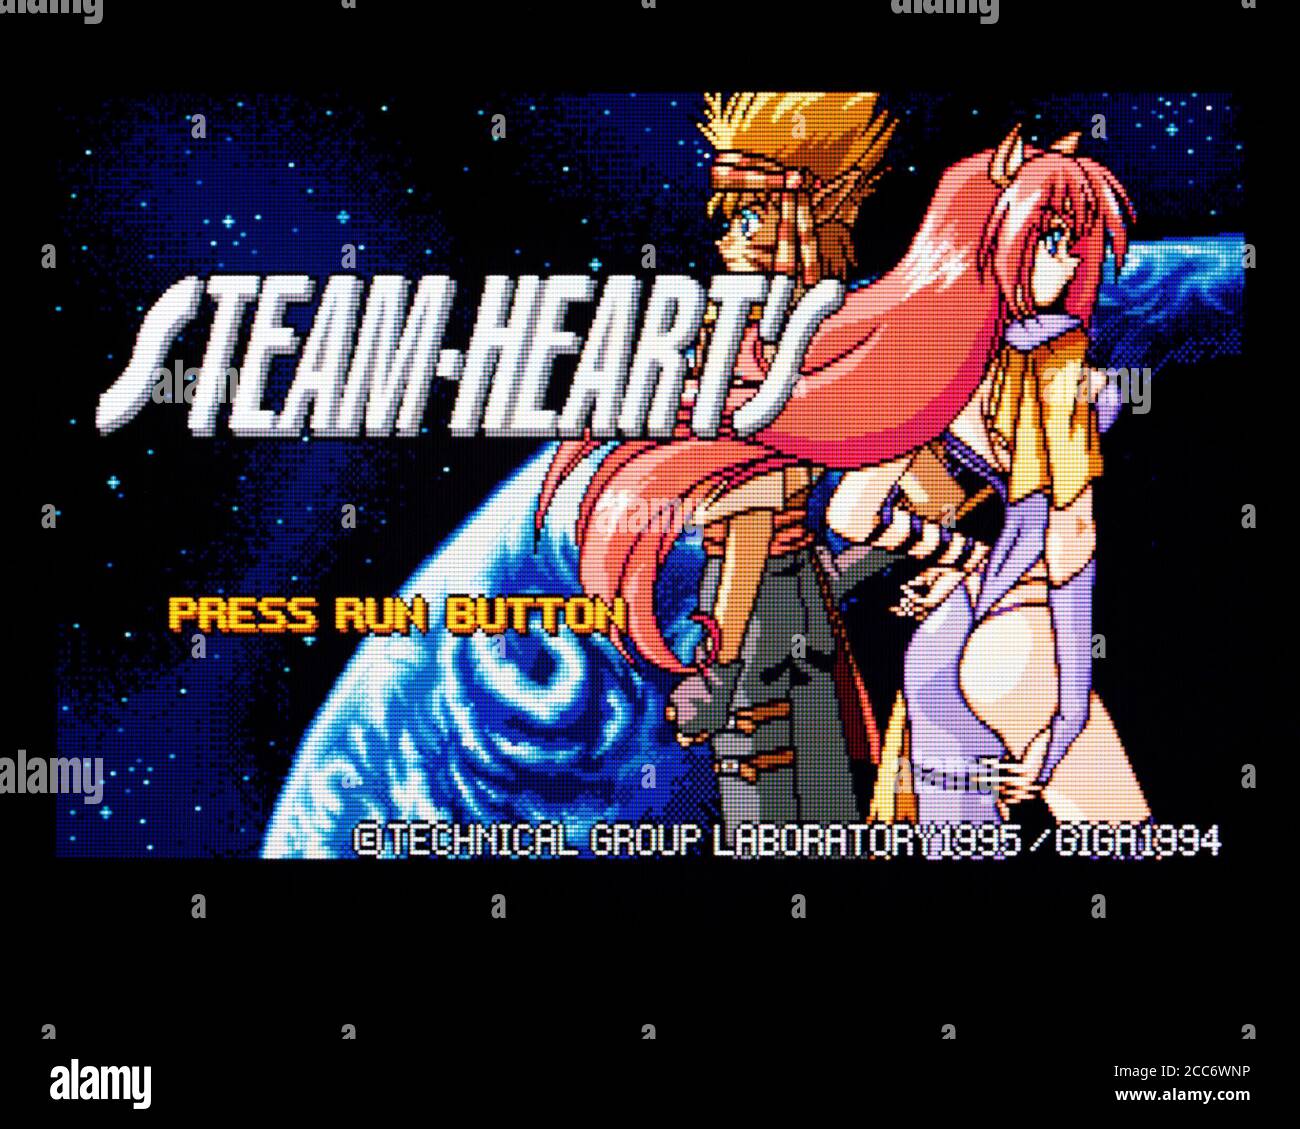 Steam Hearts - PC Engine CD Videogame - Editorial use only Stock Photo